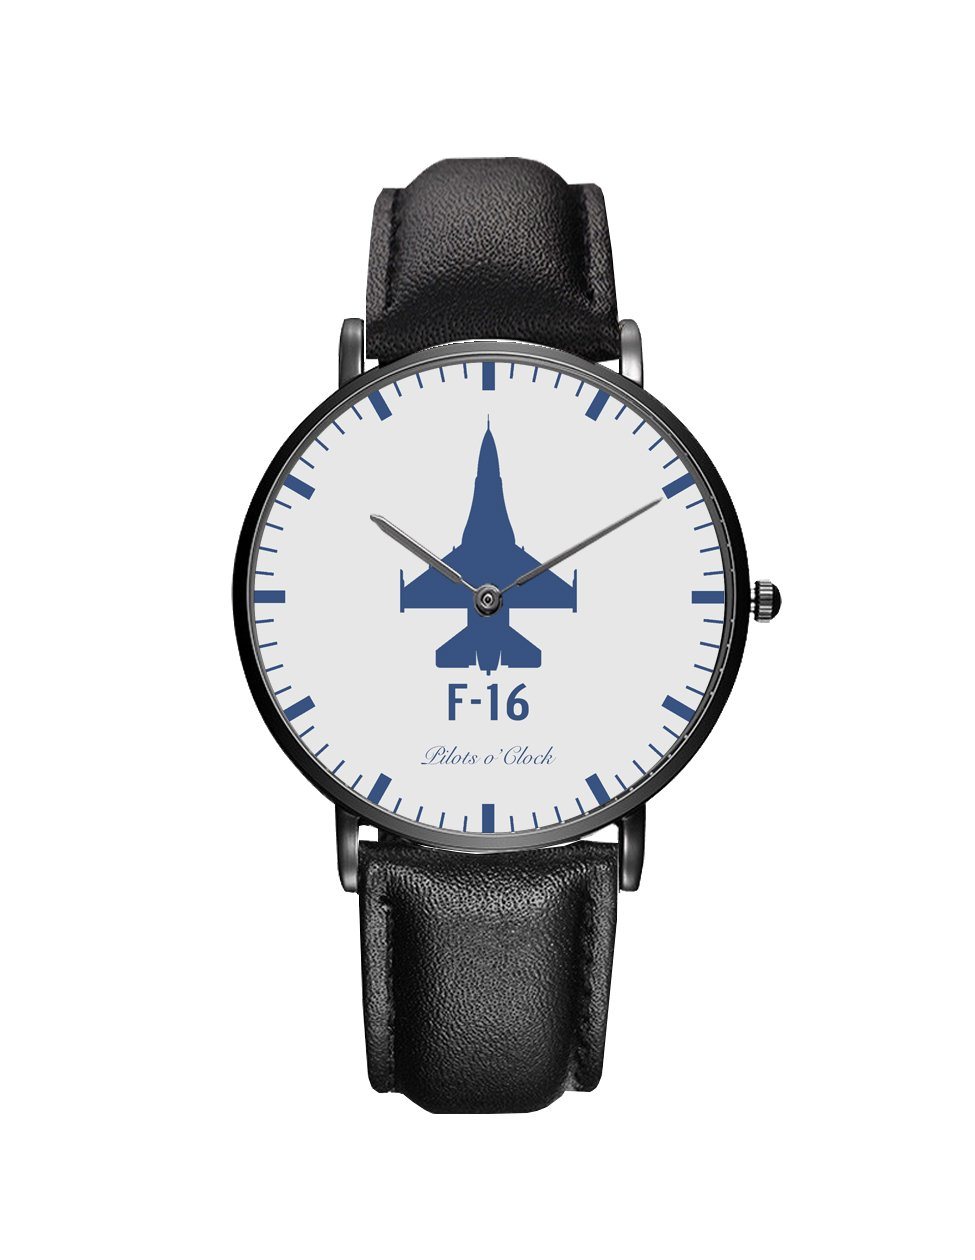 Fighting Falcon F16 Leather Strap Watches Pilot Eyes Store Black & Black Leather Strap 